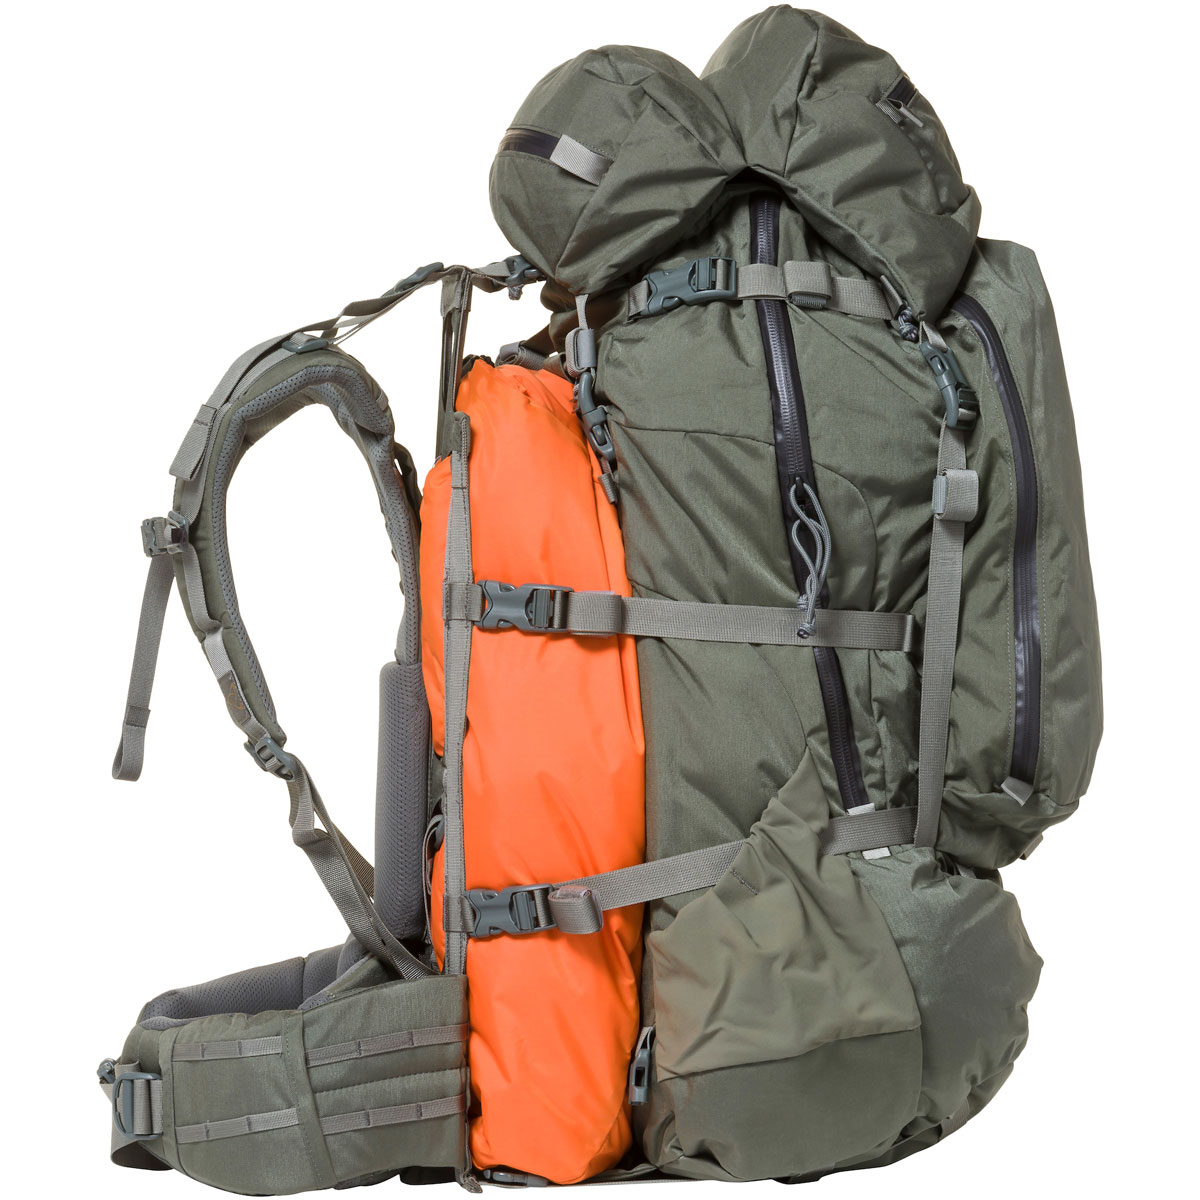 HUNTING/CARGO back Pack with custom cargo/meat sling SERIOUS COMFORT FREE SHIP 